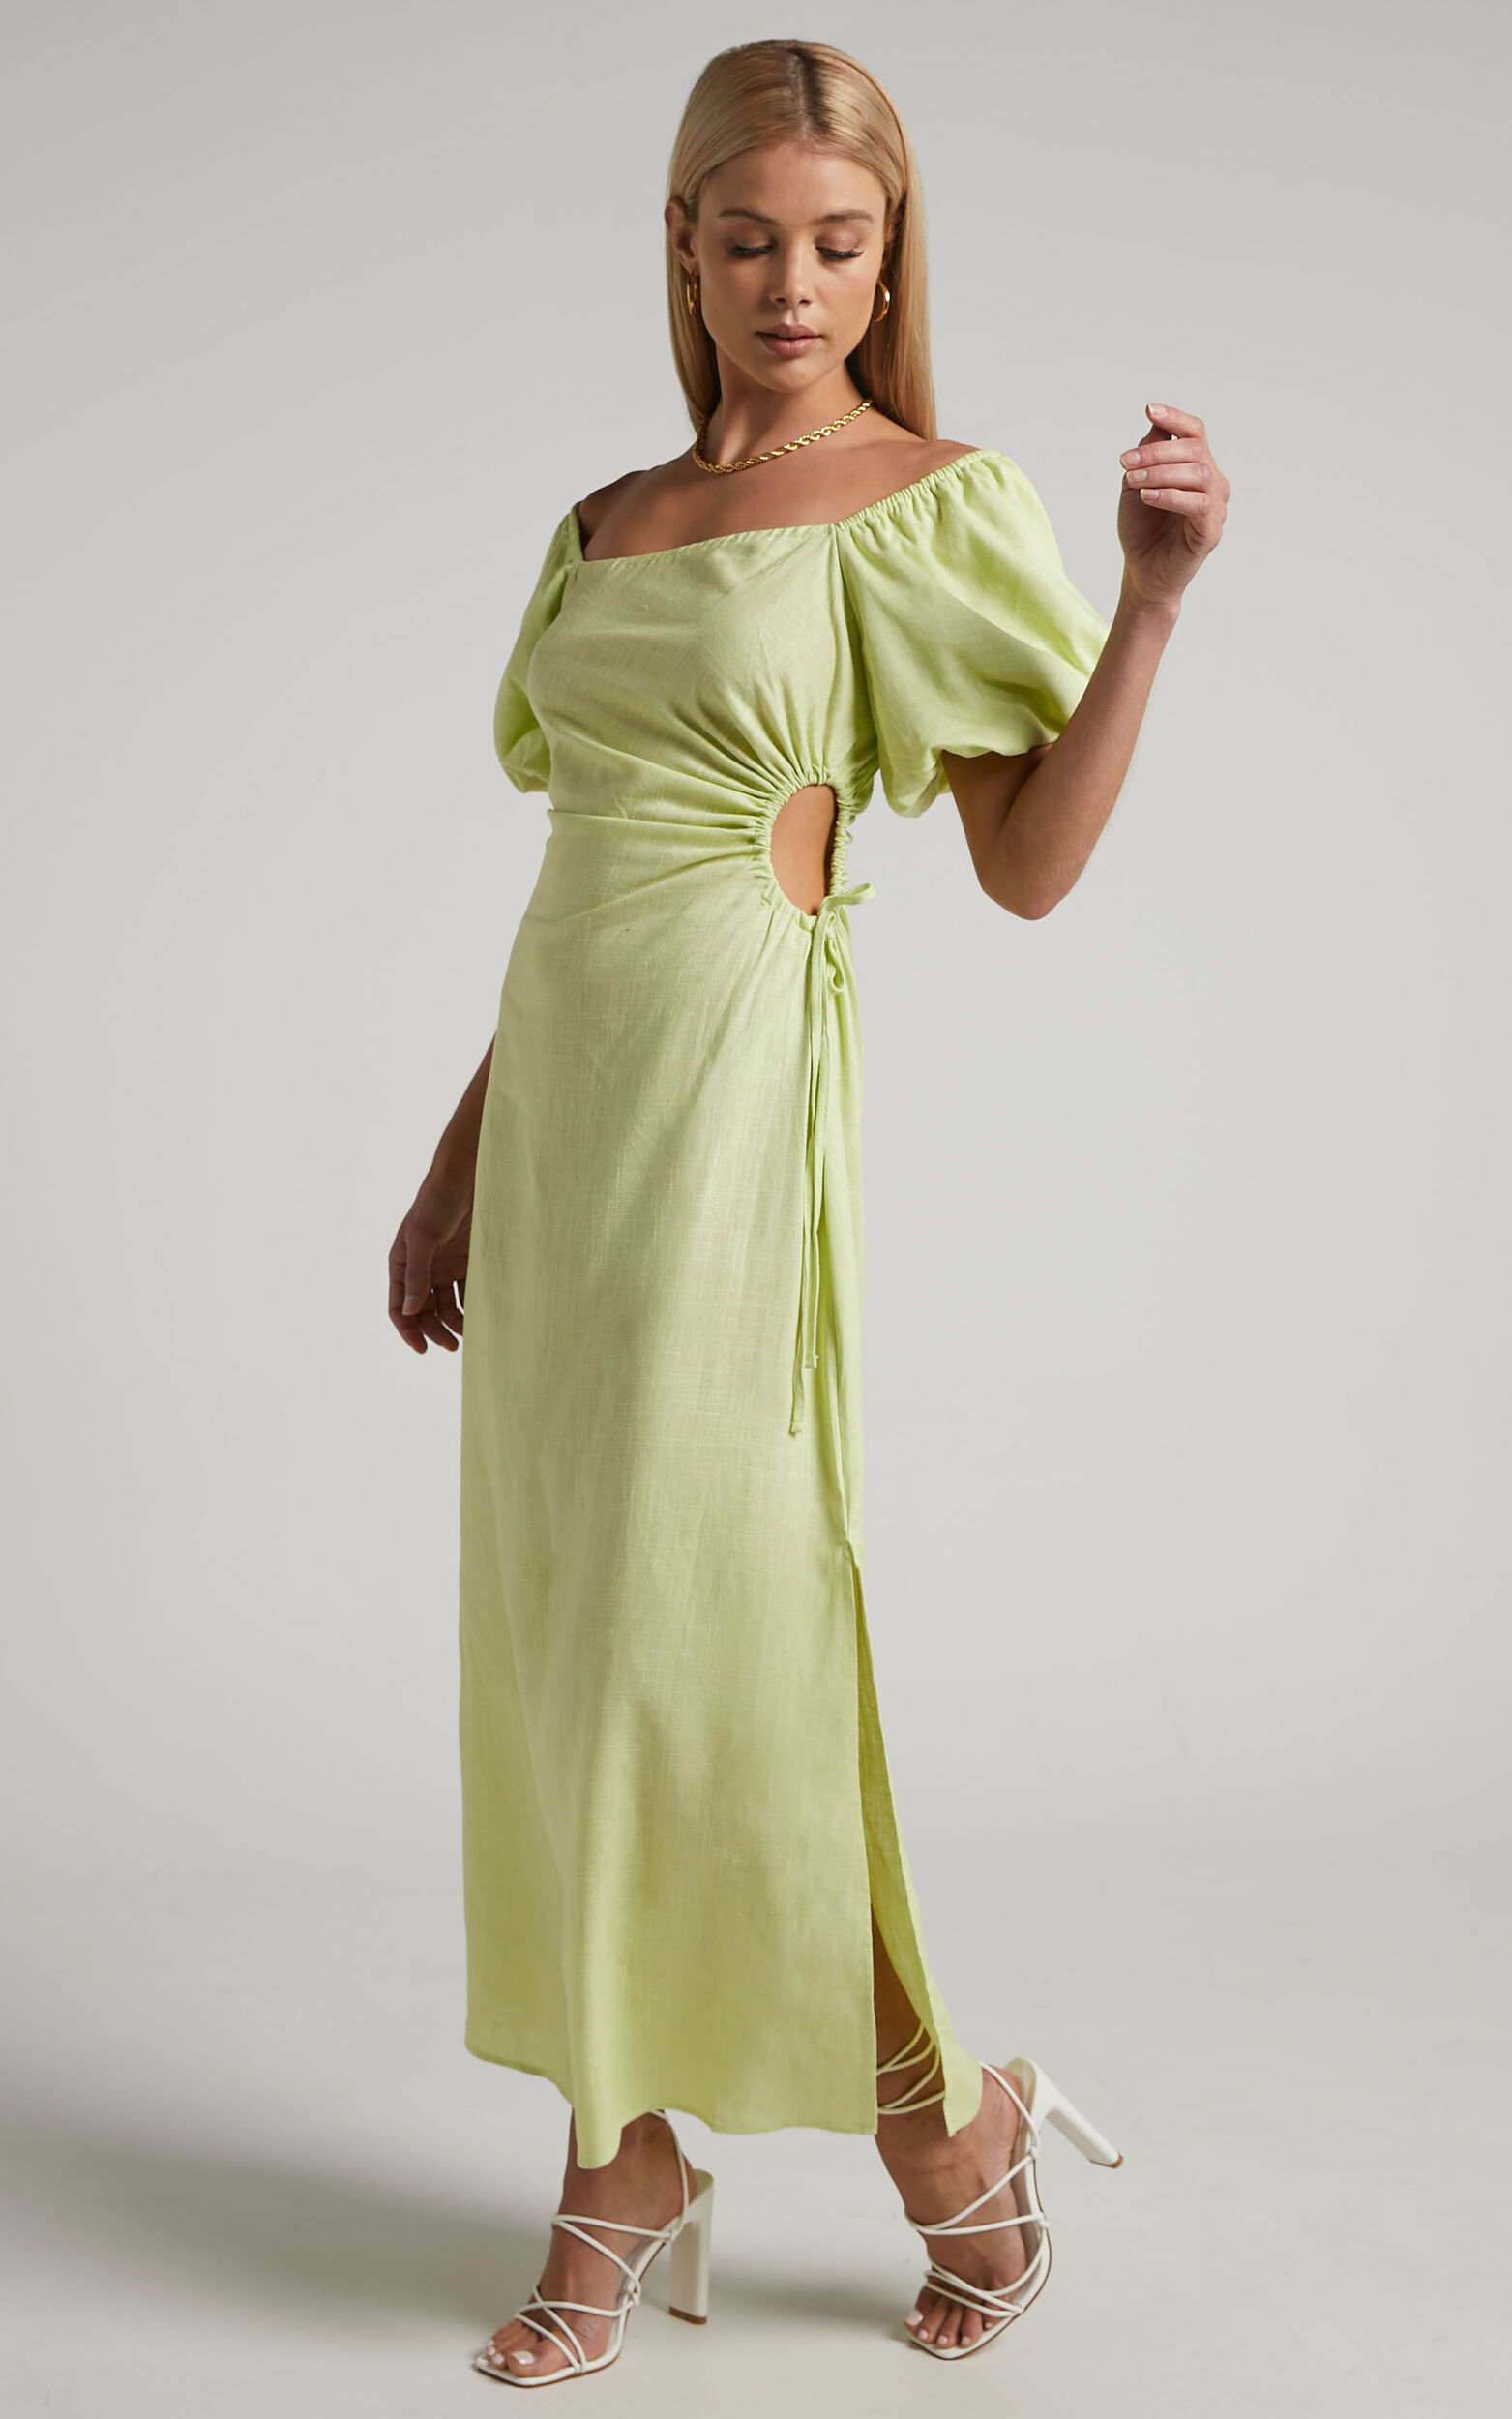 Ebony Maxi Dress - Side Cut Out Square Neck Puff Sleeve Dress in Citrus - 06, YEL1